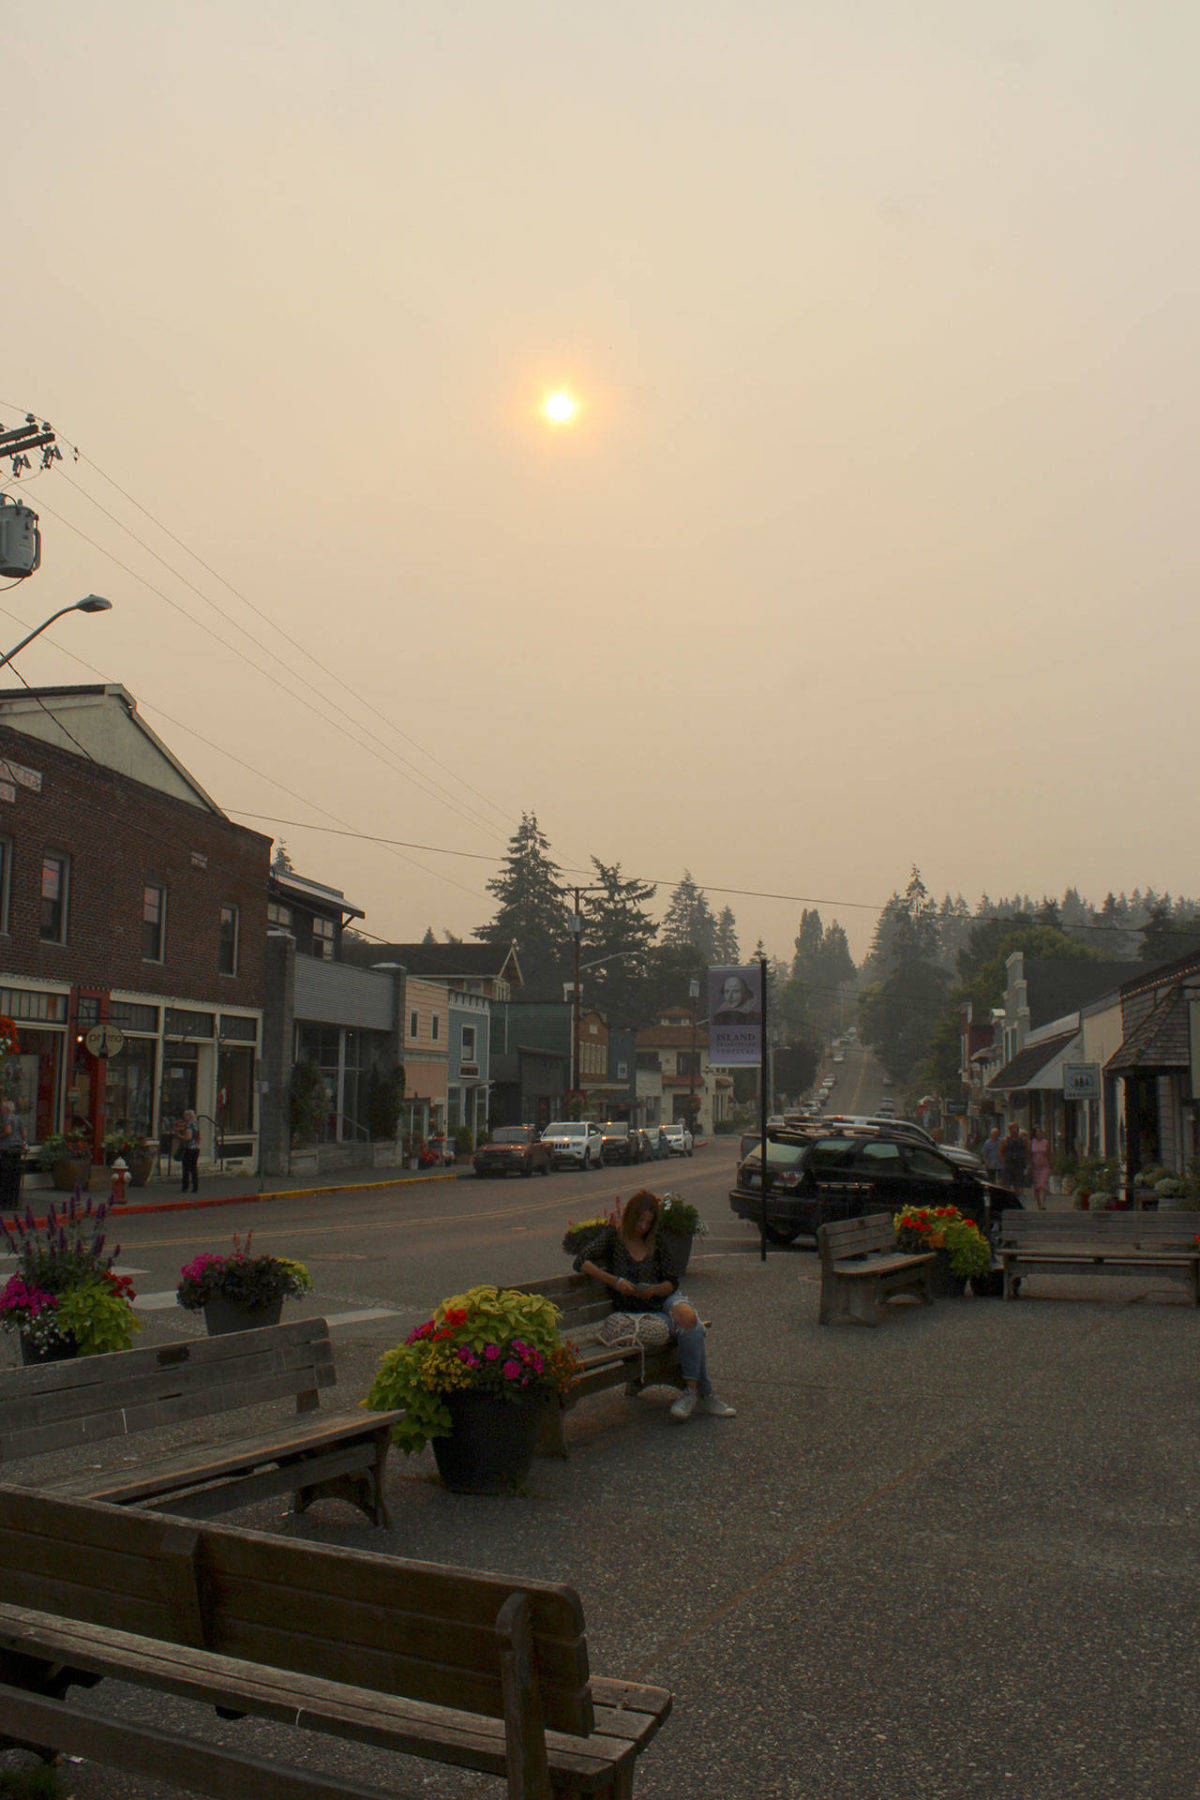 In August, smoke from distant wildfires led to unhealthy air throughout western Washington, including in Langley. (Photo by Patricia Guthrie/Whidbey News Group)